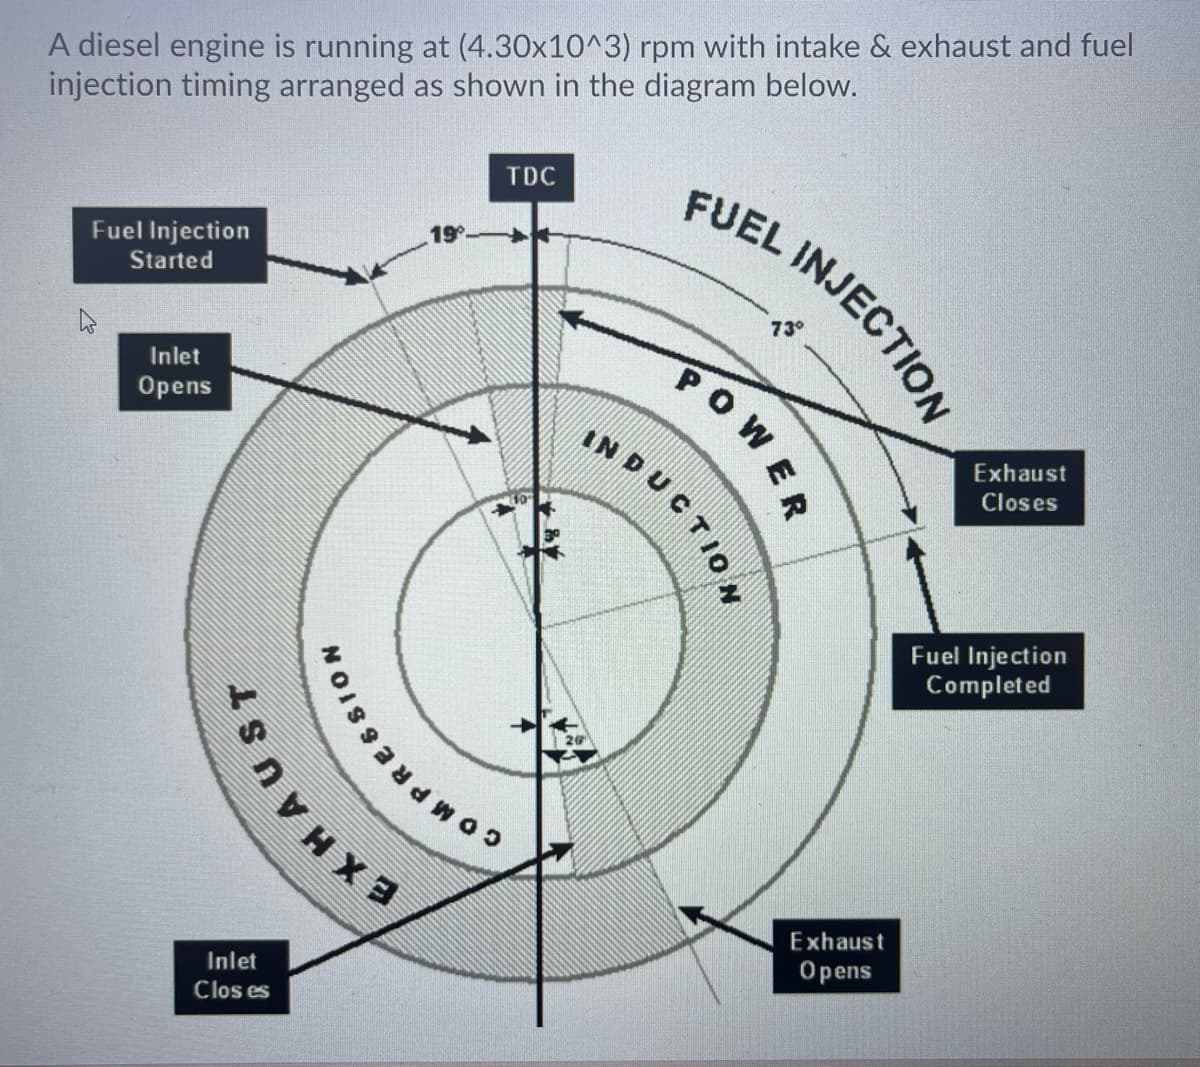 A diesel engine is running at (4.30x10^3) rpm with intake & exhaust and fuel
injection timing arranged as shown in the diagram below.
FUEL INJECTION
TDC
Fuel Injection
19
Started
Inlet
Opens
Exhaust
Closes
Fuel Injection
Completed
Exhaust
Opens
Inlet
Clos es
POWER
MPRESSION
